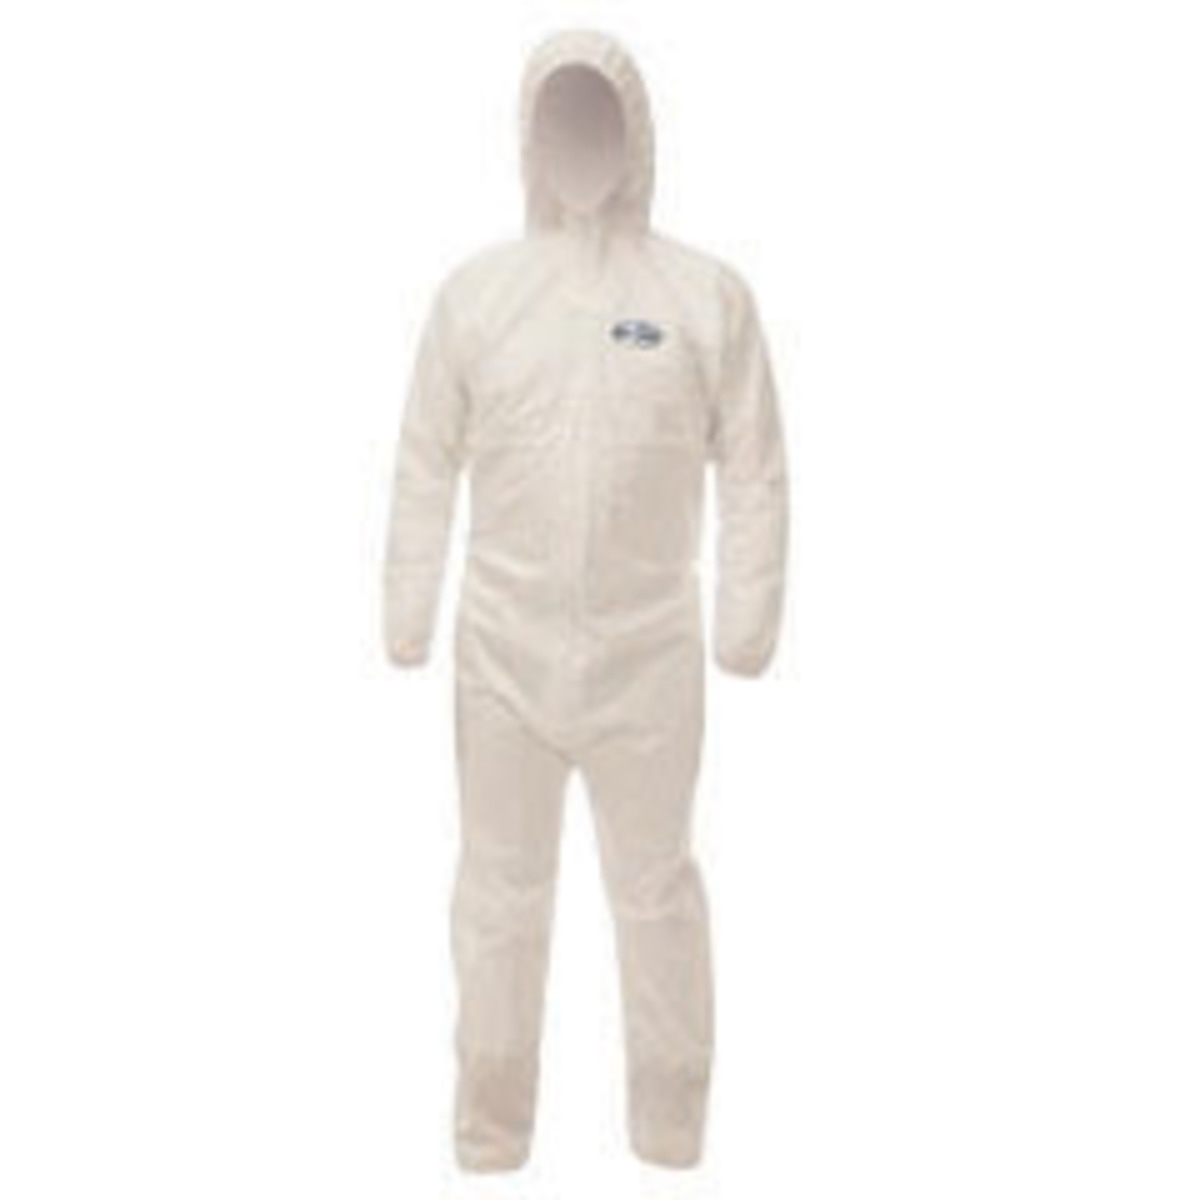 Kimberly-Clark Professional™ Medium White KleenGuard™ A20 SMMMS Disposable Coveralls (Availability restrictions apply.)